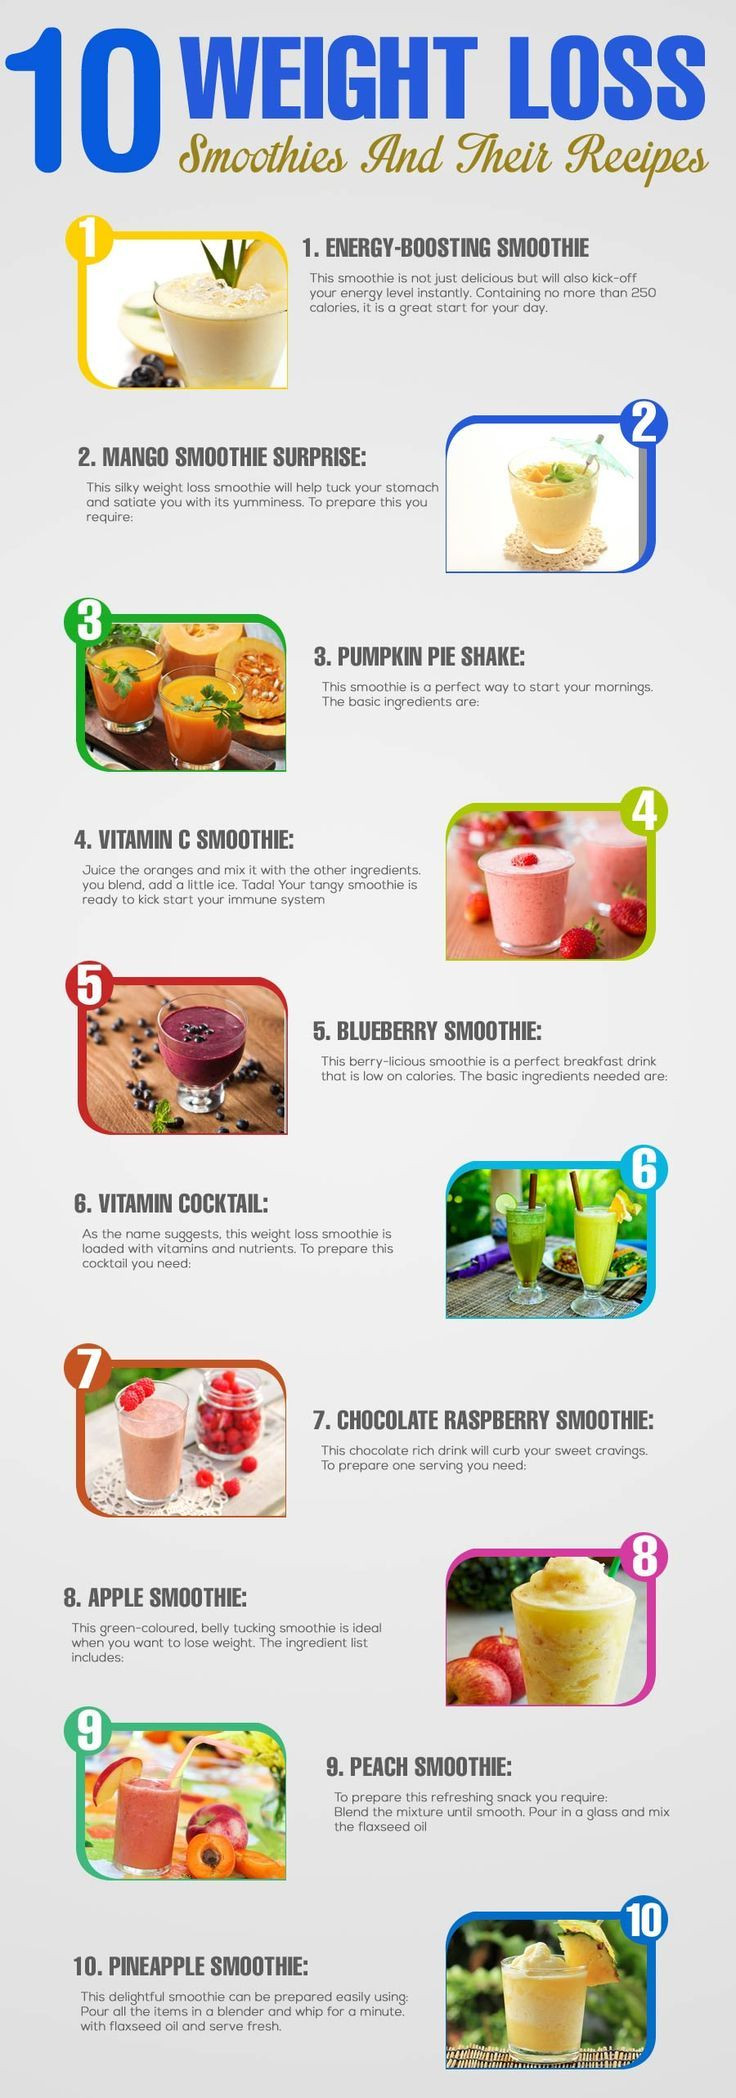 Weight Loss Smoothies Ingredients
 10 Weight Loss Smoothies s and for